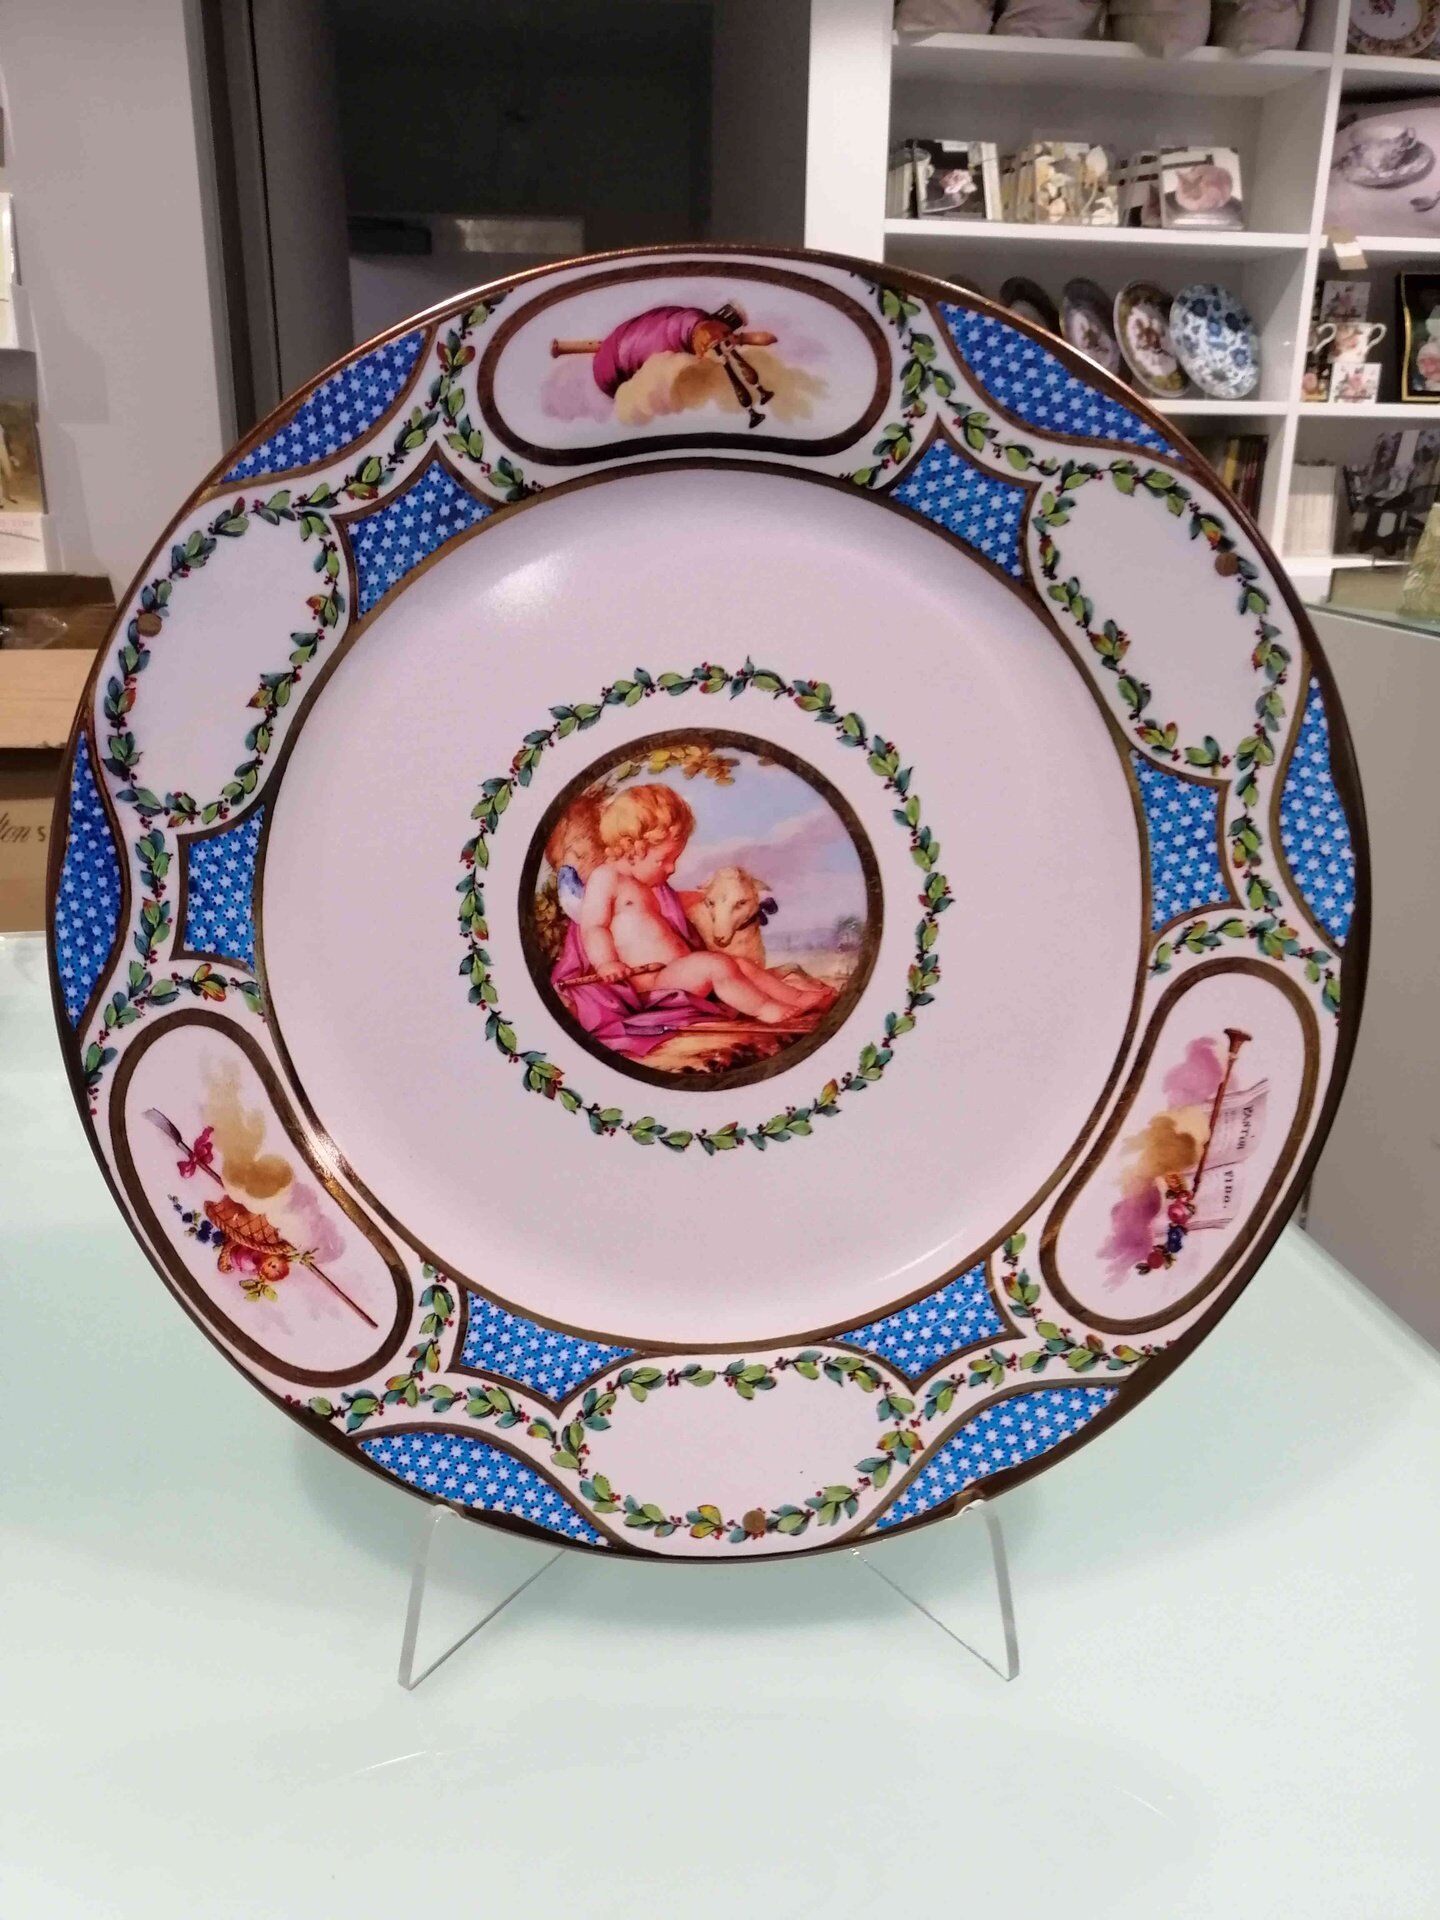 Tin Plate: Royal Collection - The Madame du Barry Plate